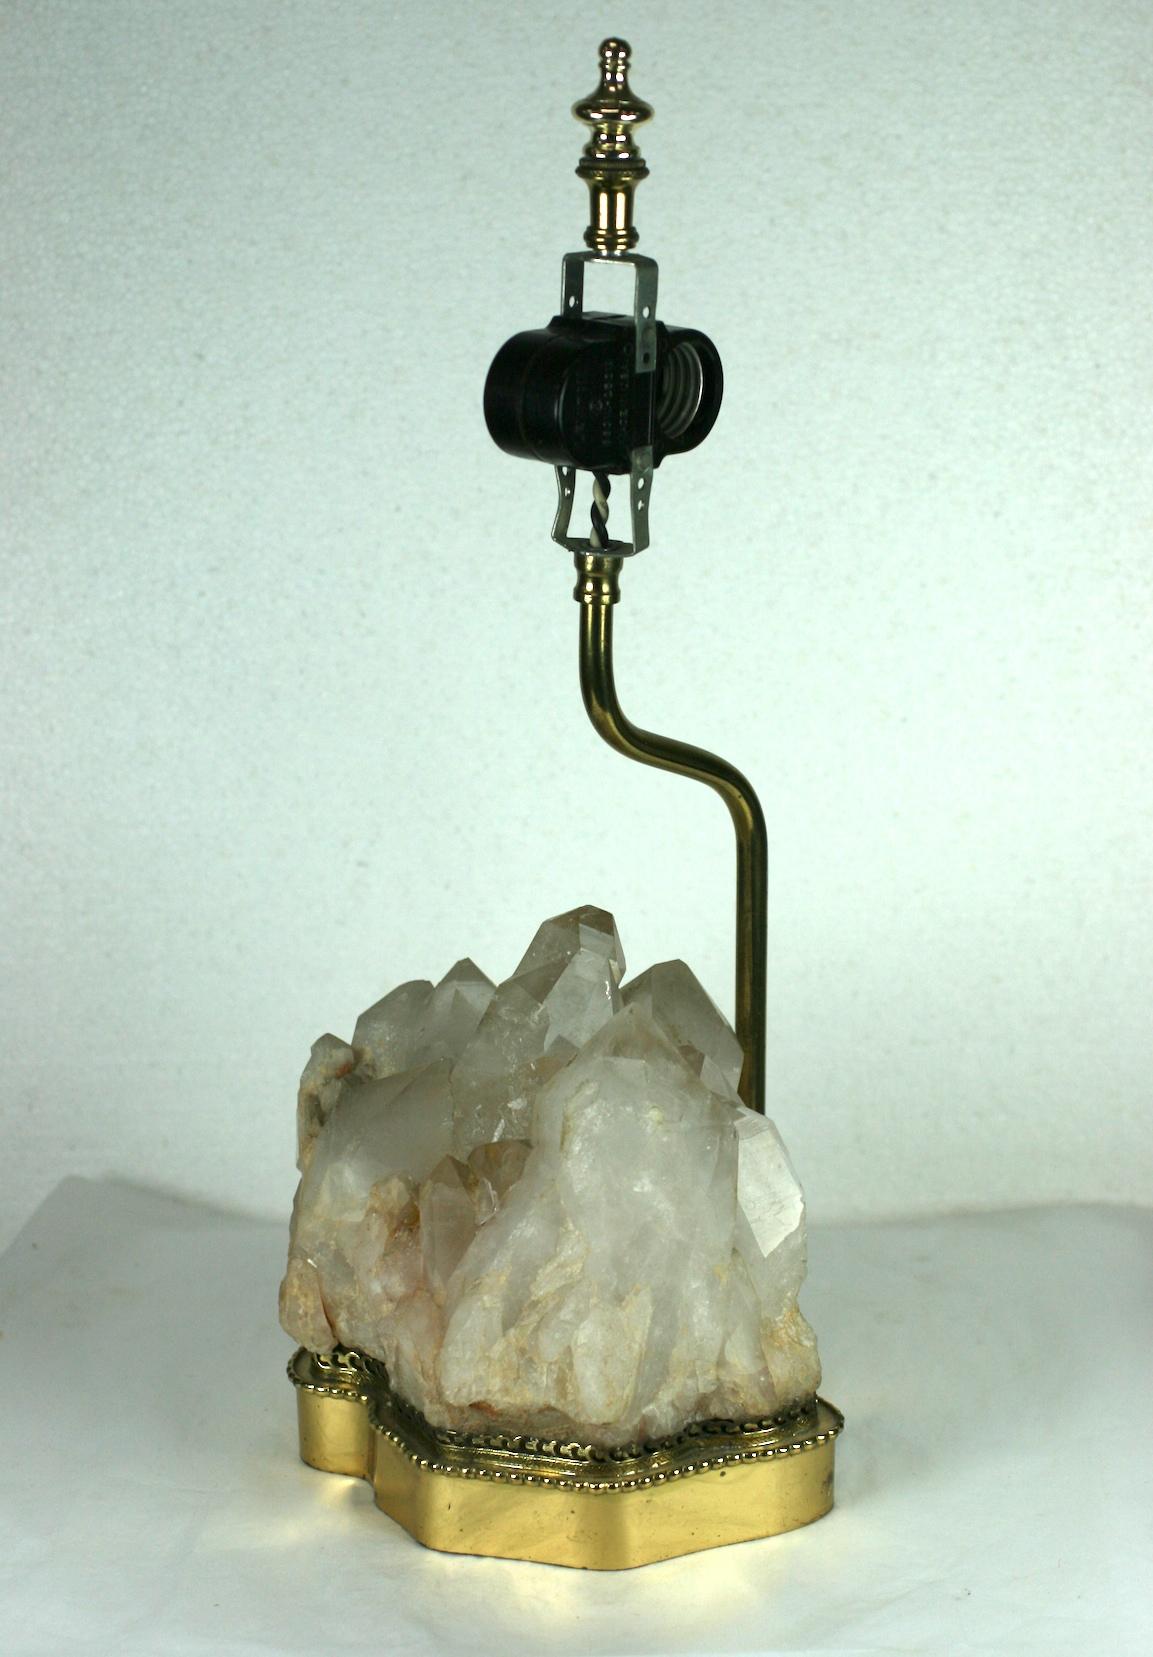 Rock crystal quartz lamp on brass base set within a filigree gallery with period wiring. Classic elegant and timeless design.
Place for 2 bulbs. Lacking shade. Original wheel switch, 1960s.
Measures: Total height 17